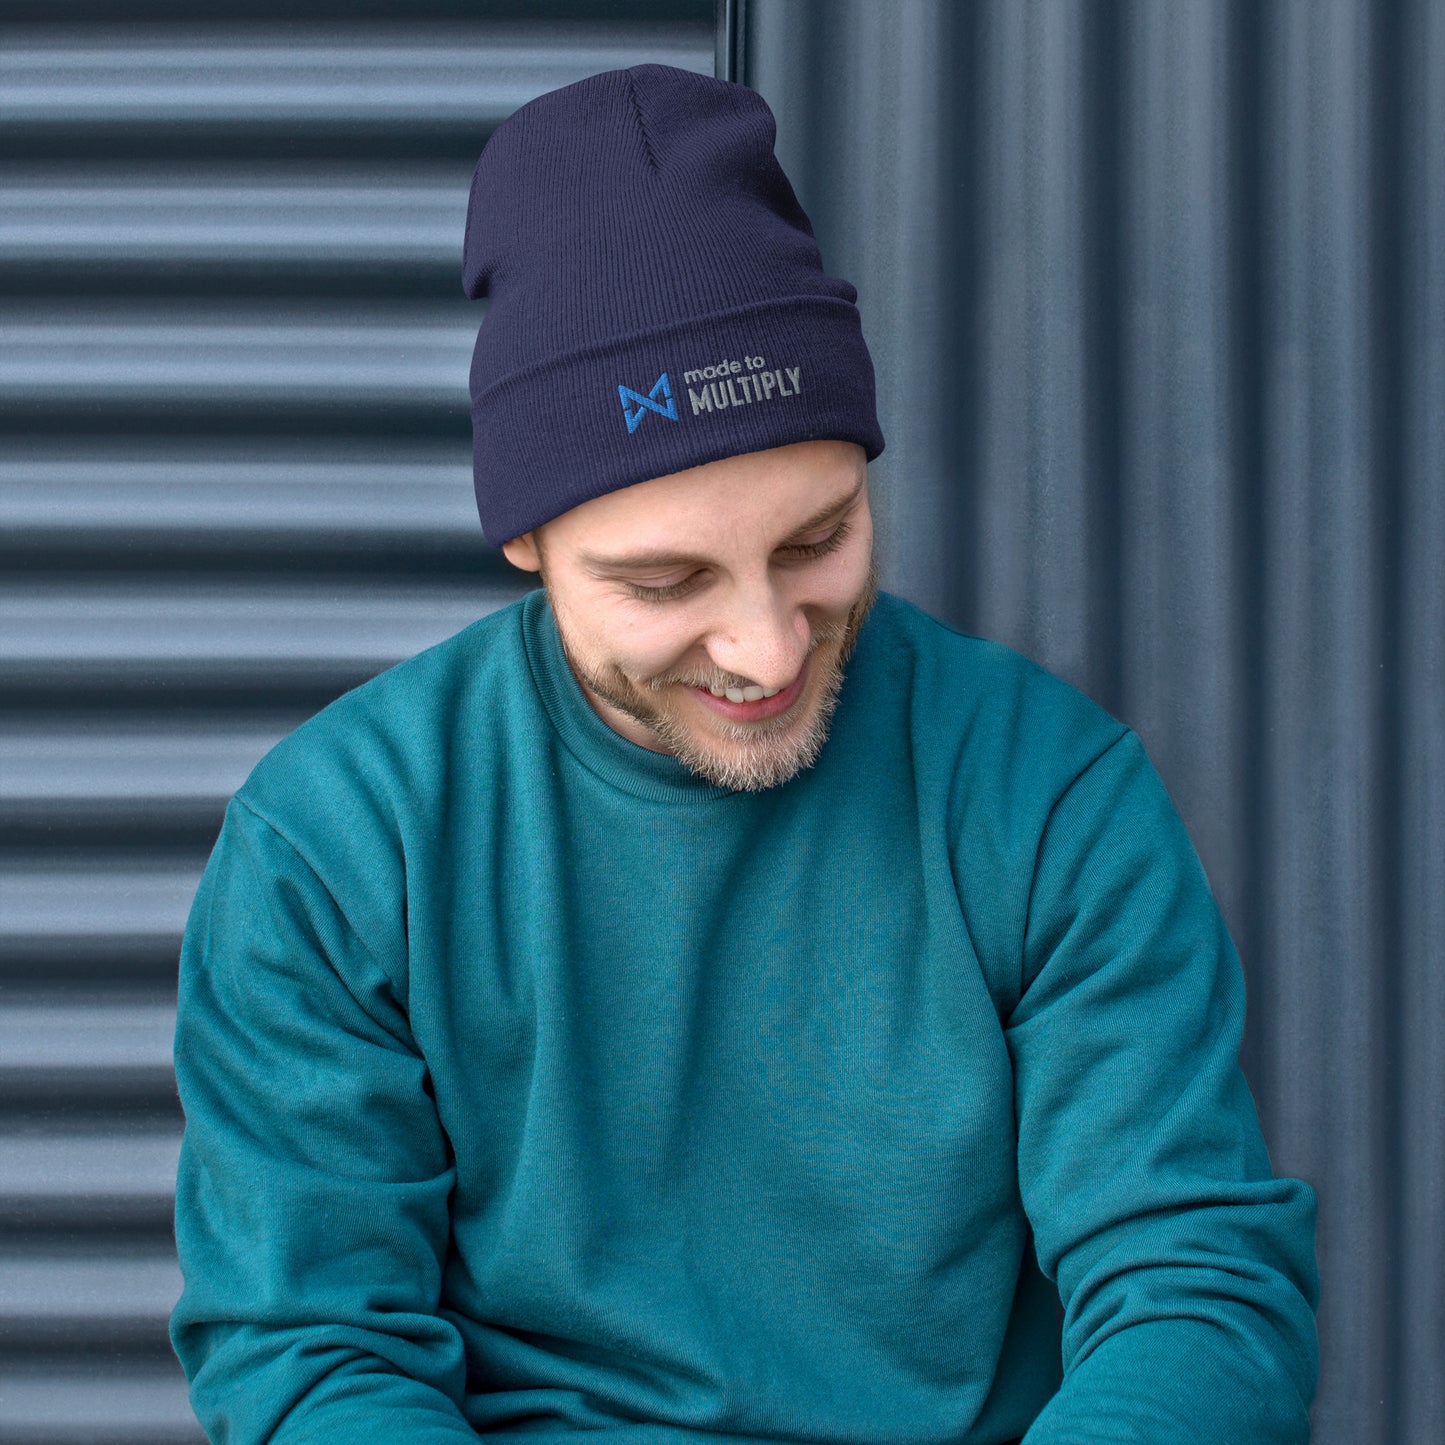 Made to Multiply - Embroidered Beanie